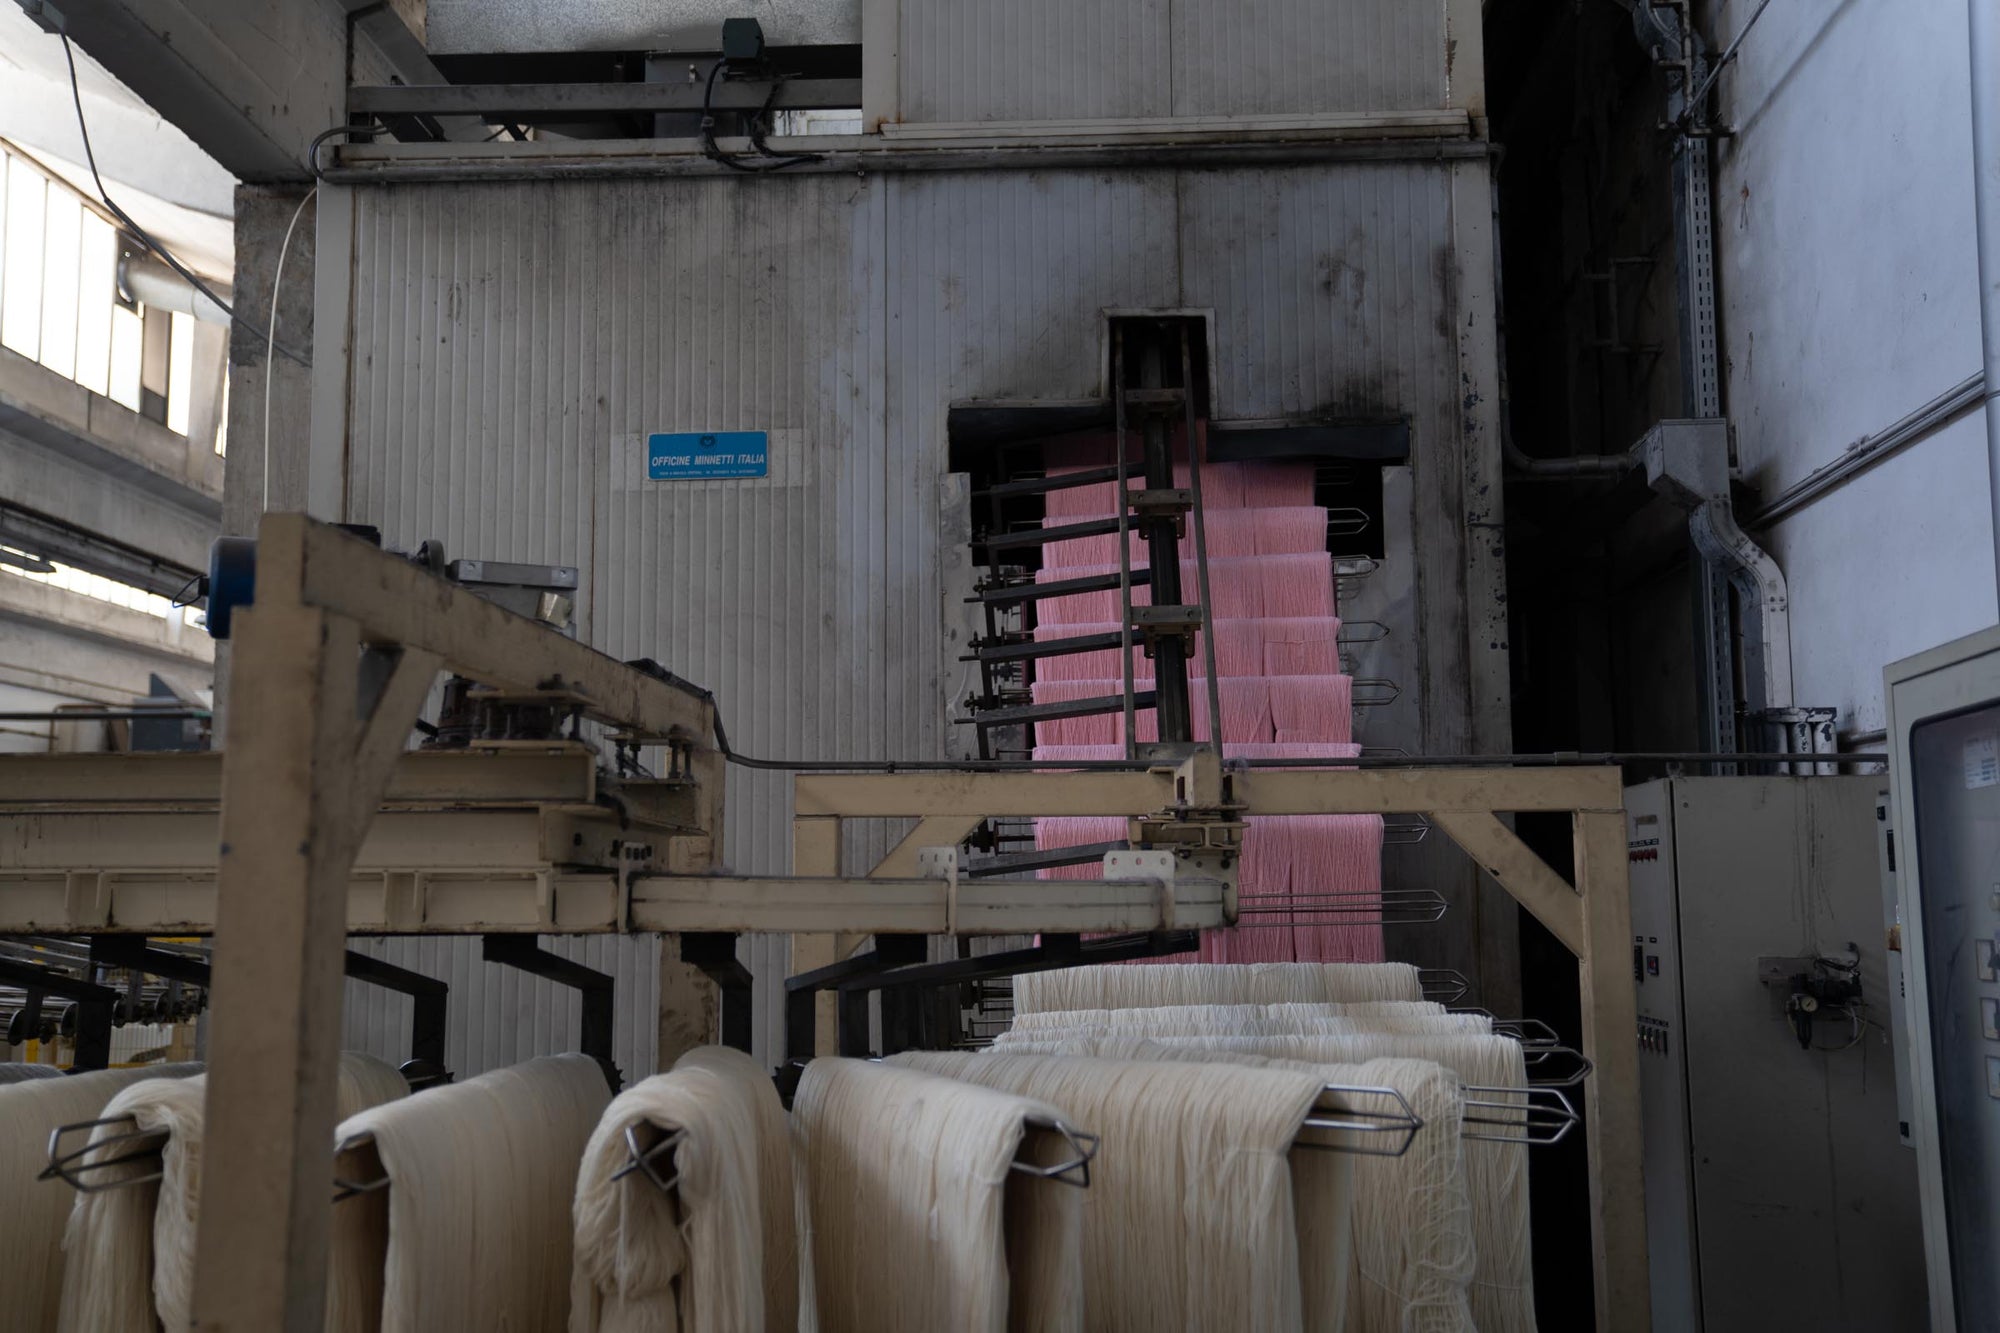 White and pink hanks of Merino wool on metal rods being mechanically transported into the drying oven.